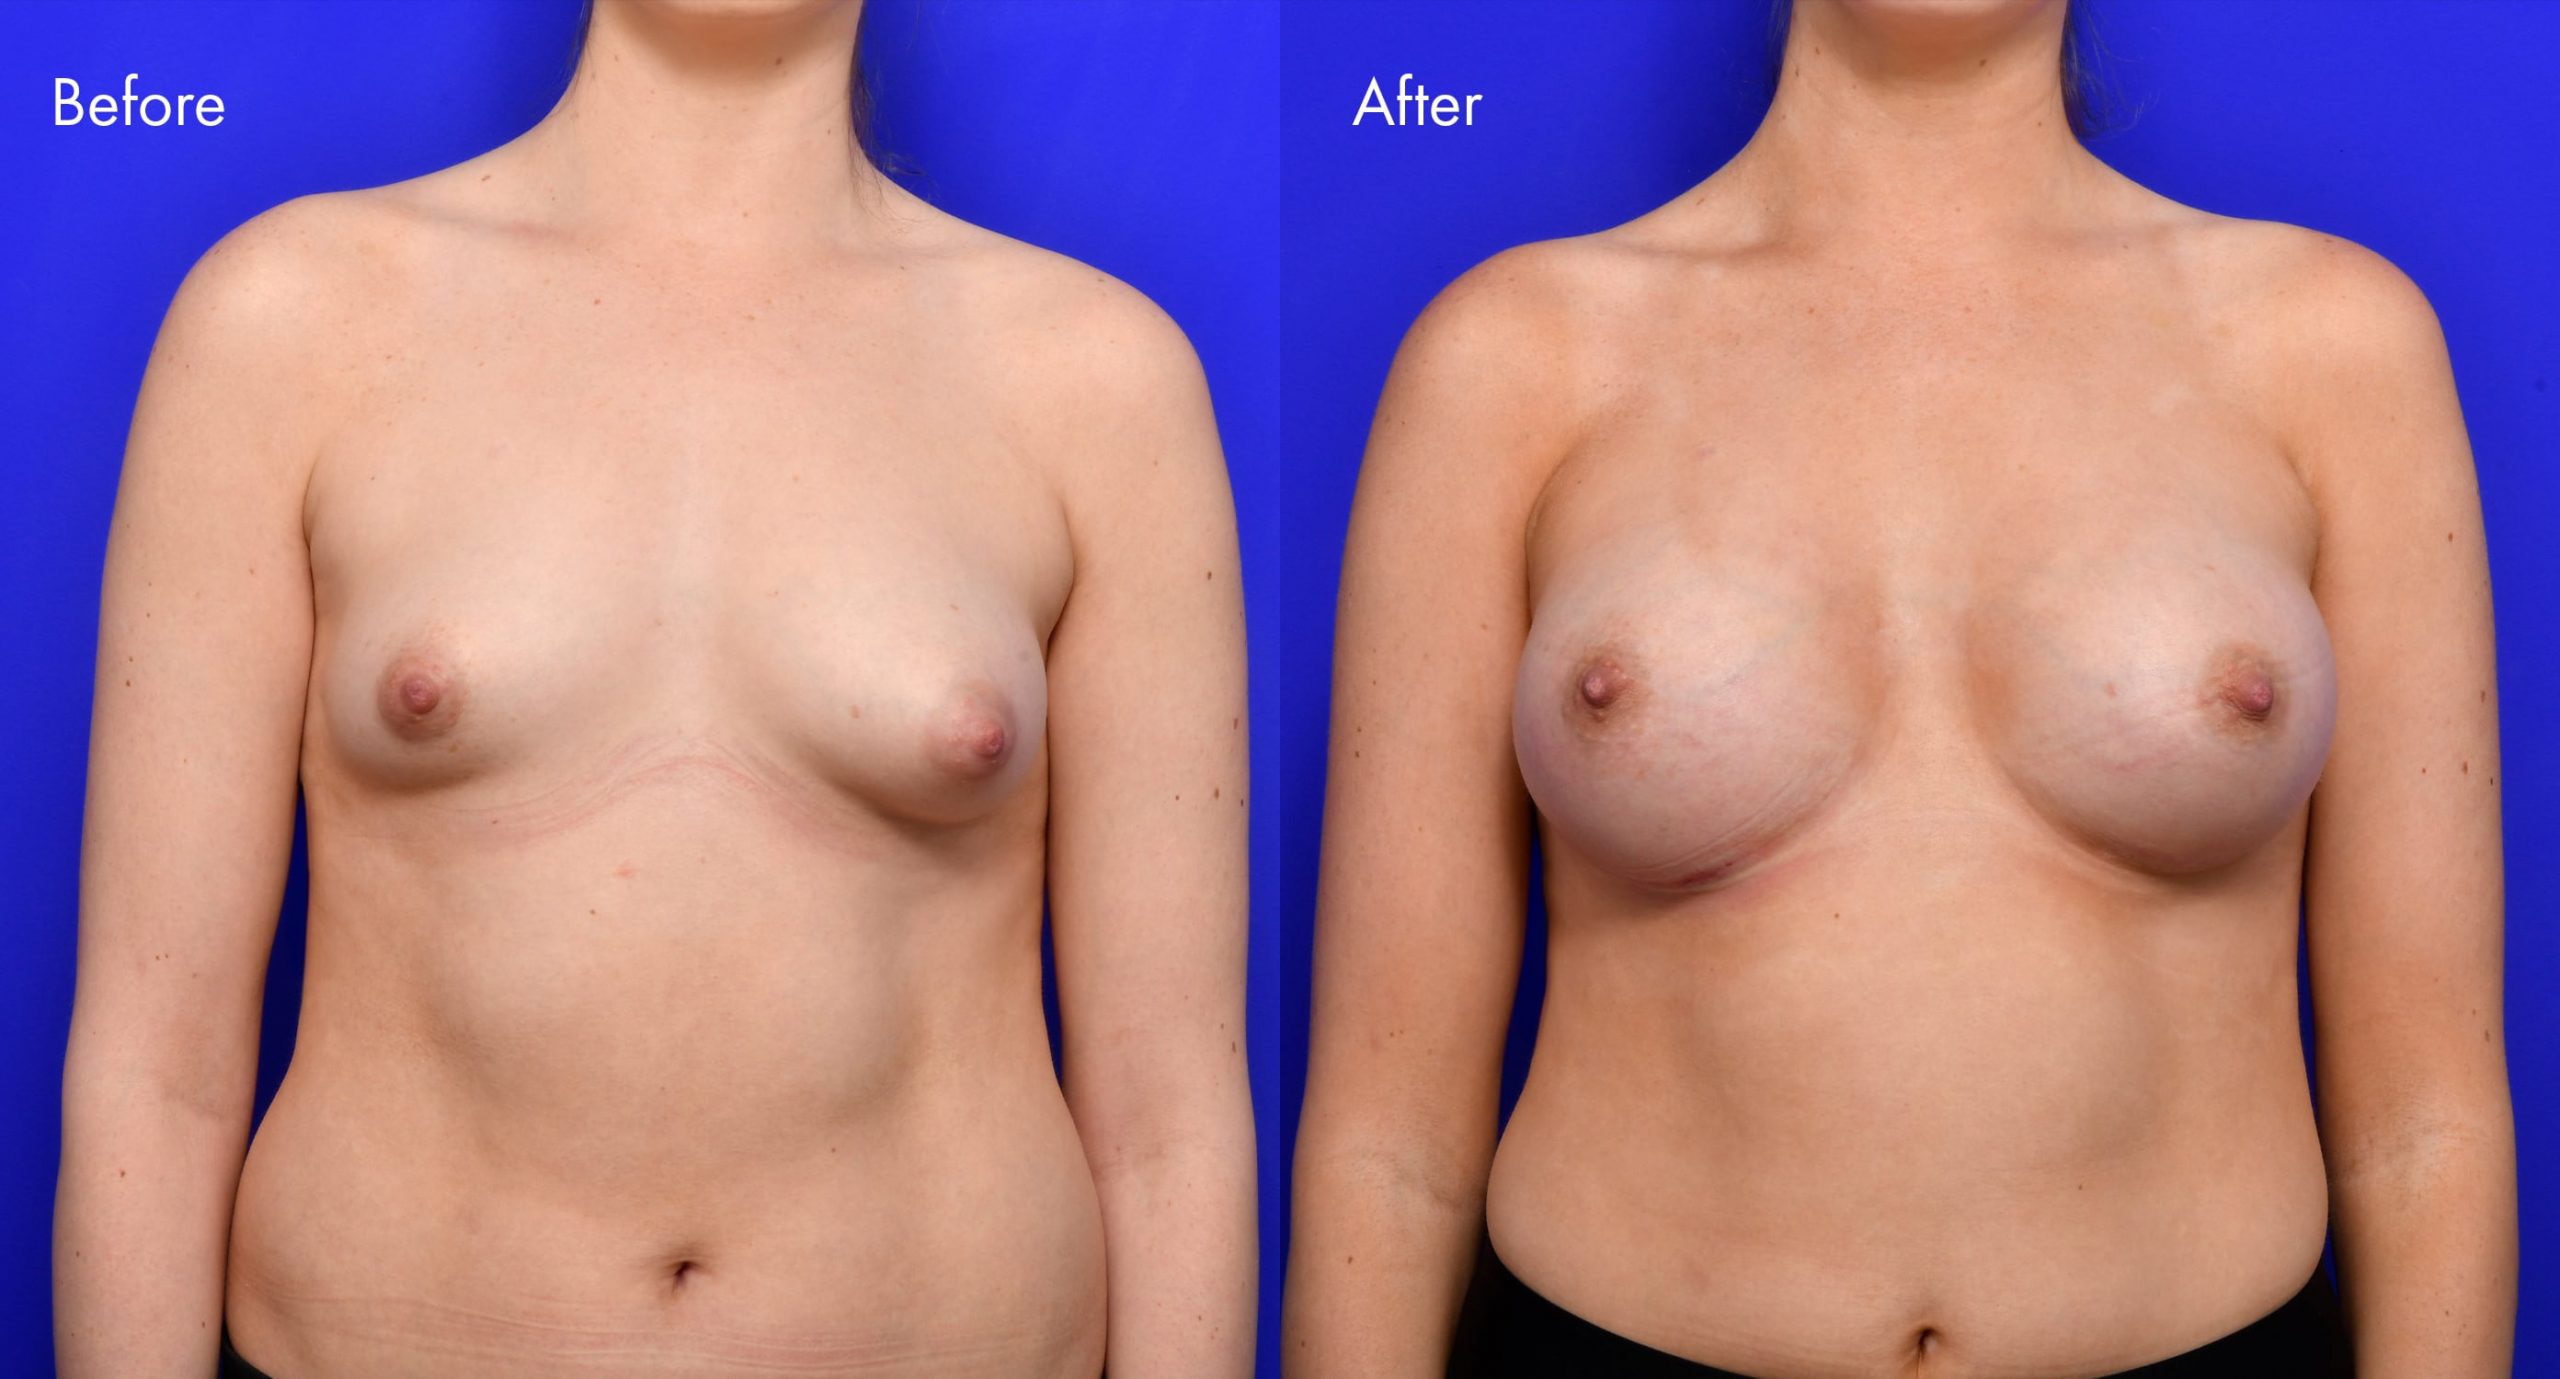 Plastic Surgery Before and After Gallery | 12